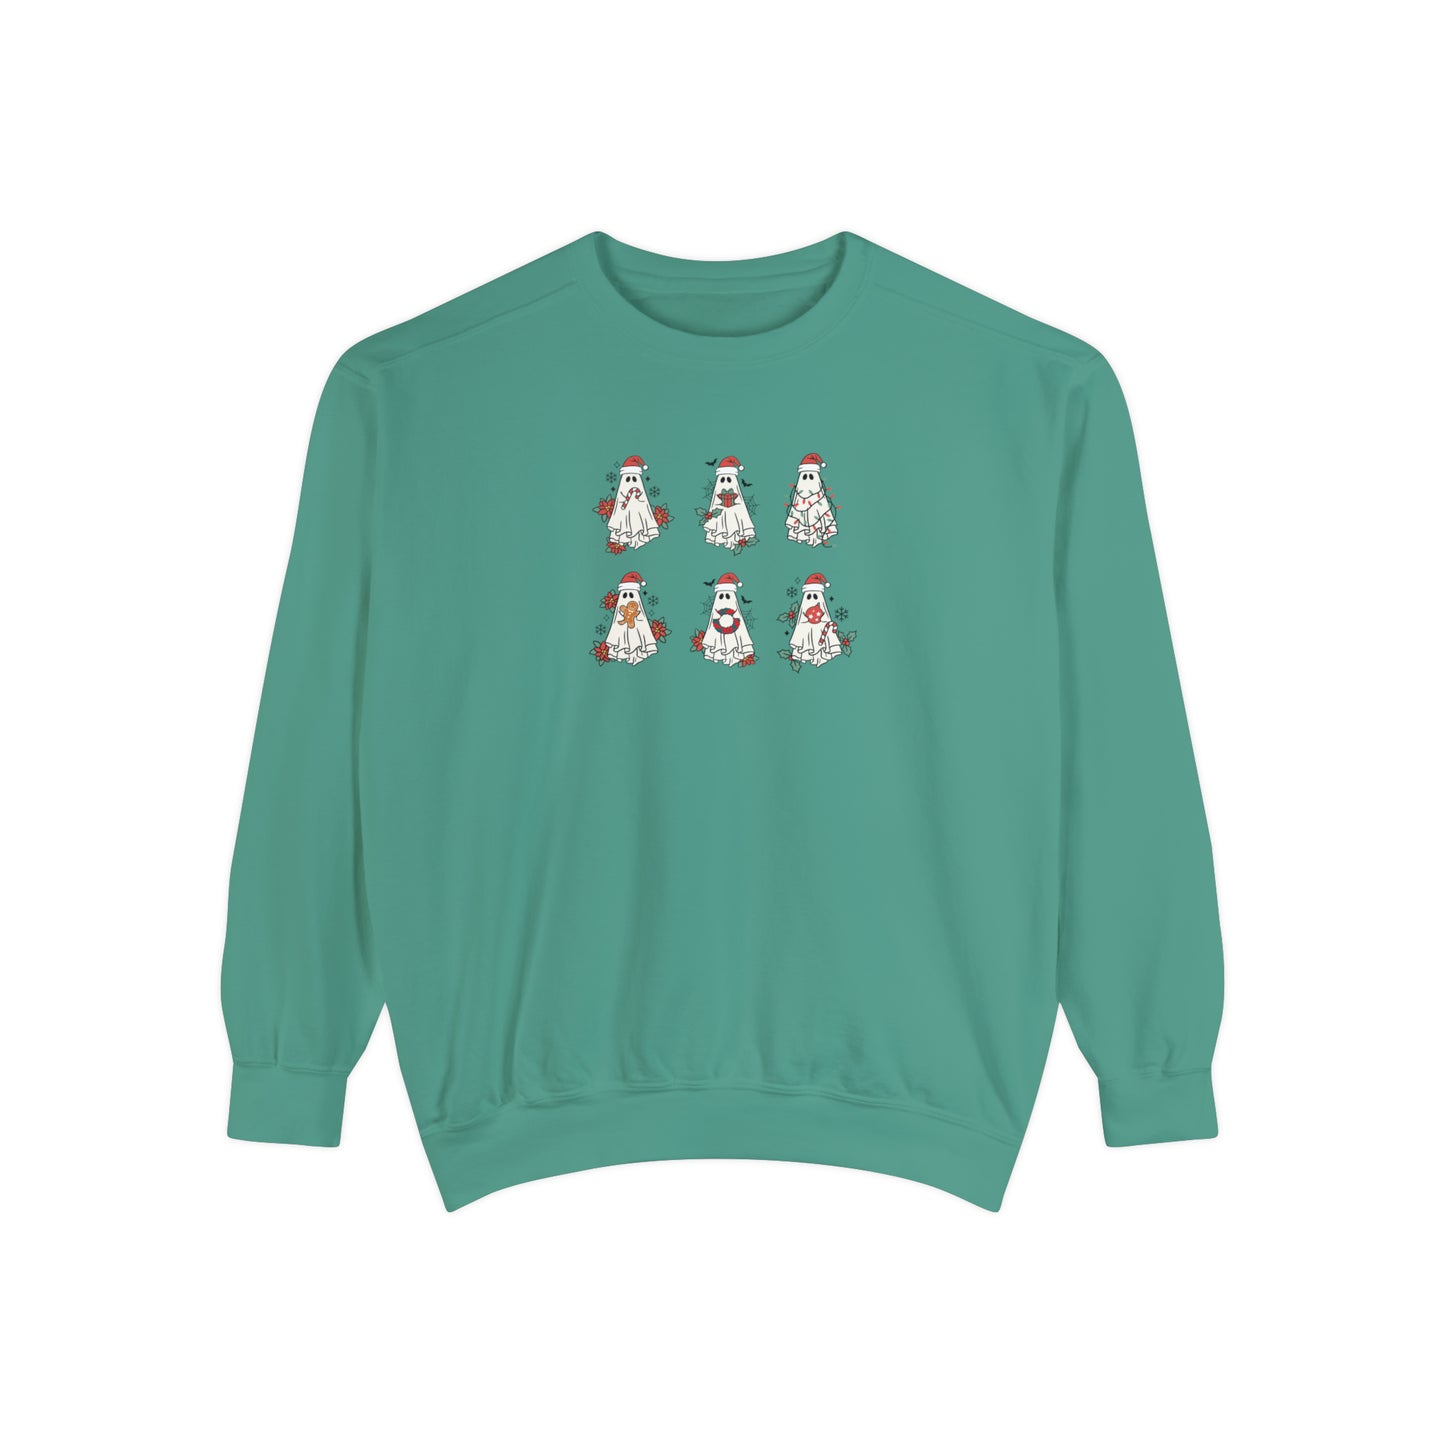 Christmas ghosts Sweatshirt for holiday season. Dead inside but is Christmas time. Cute Christmas sweater for her or him.